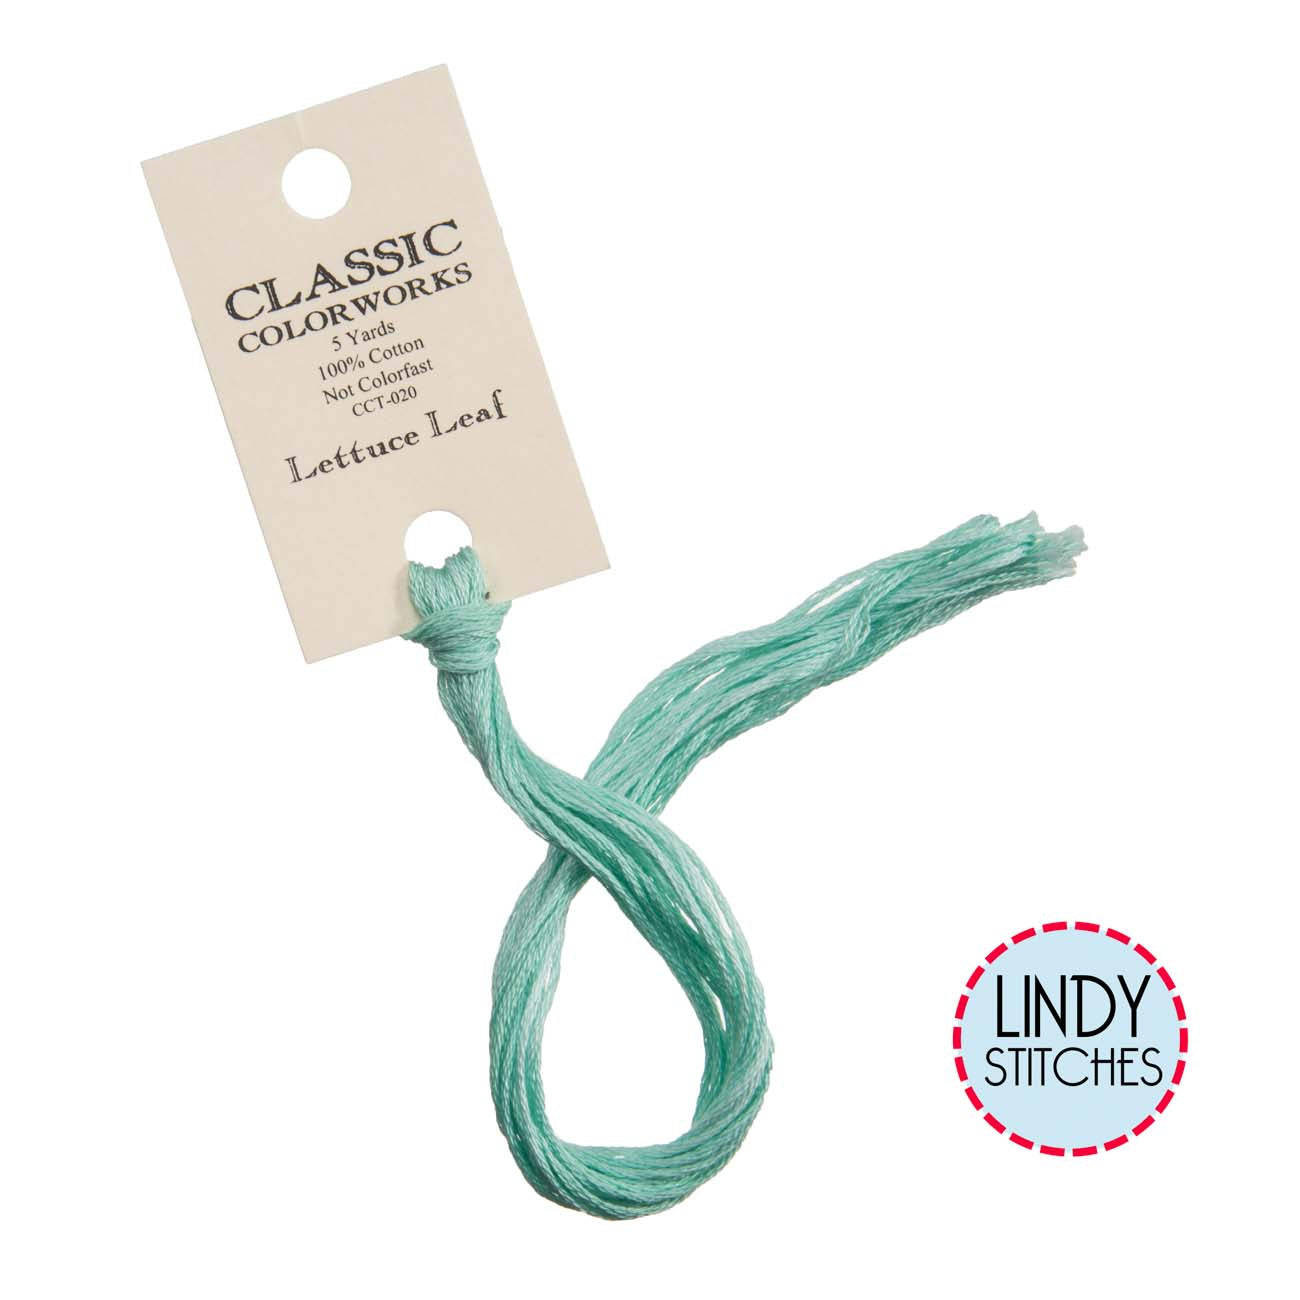 Lettuce Leaf Classic Colorworks Floss Hand Dyed Cotton Skein